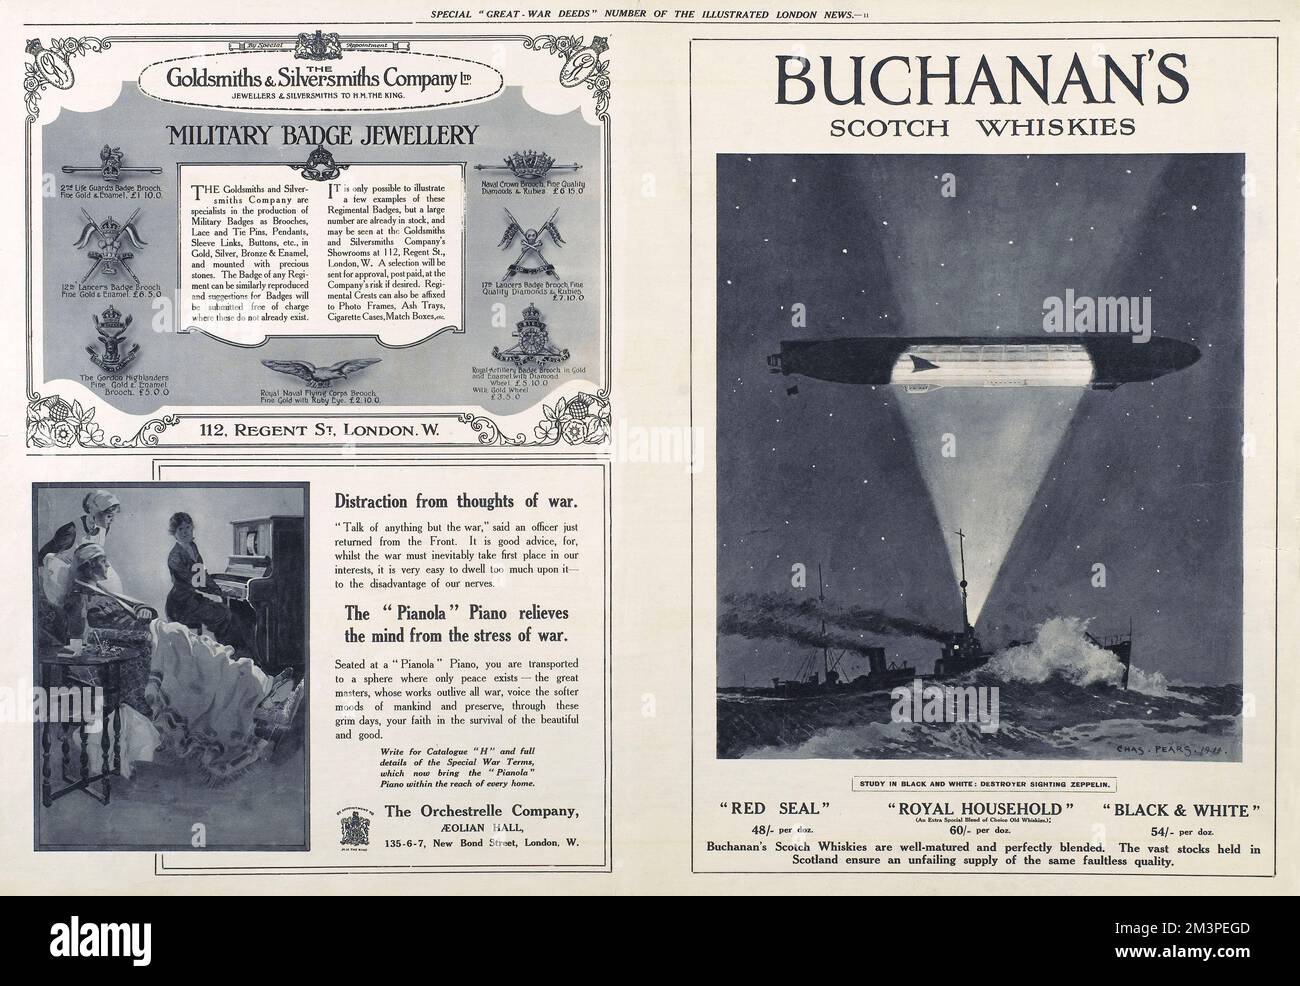 A page of three advertisements in Great War Deeds, a special panorama supplement produced by the Illustrated London News in 1915, featuring heroic actions of the First World War.  The adverts are for the Goldsmiths &amp; Silversmiths Company (military badge jewellery), the Orchestrelle Company (pianola piano), and Buchanan's Scotch Whiskies, all three with explicit references to the war.       Date: 1915 Stock Photo